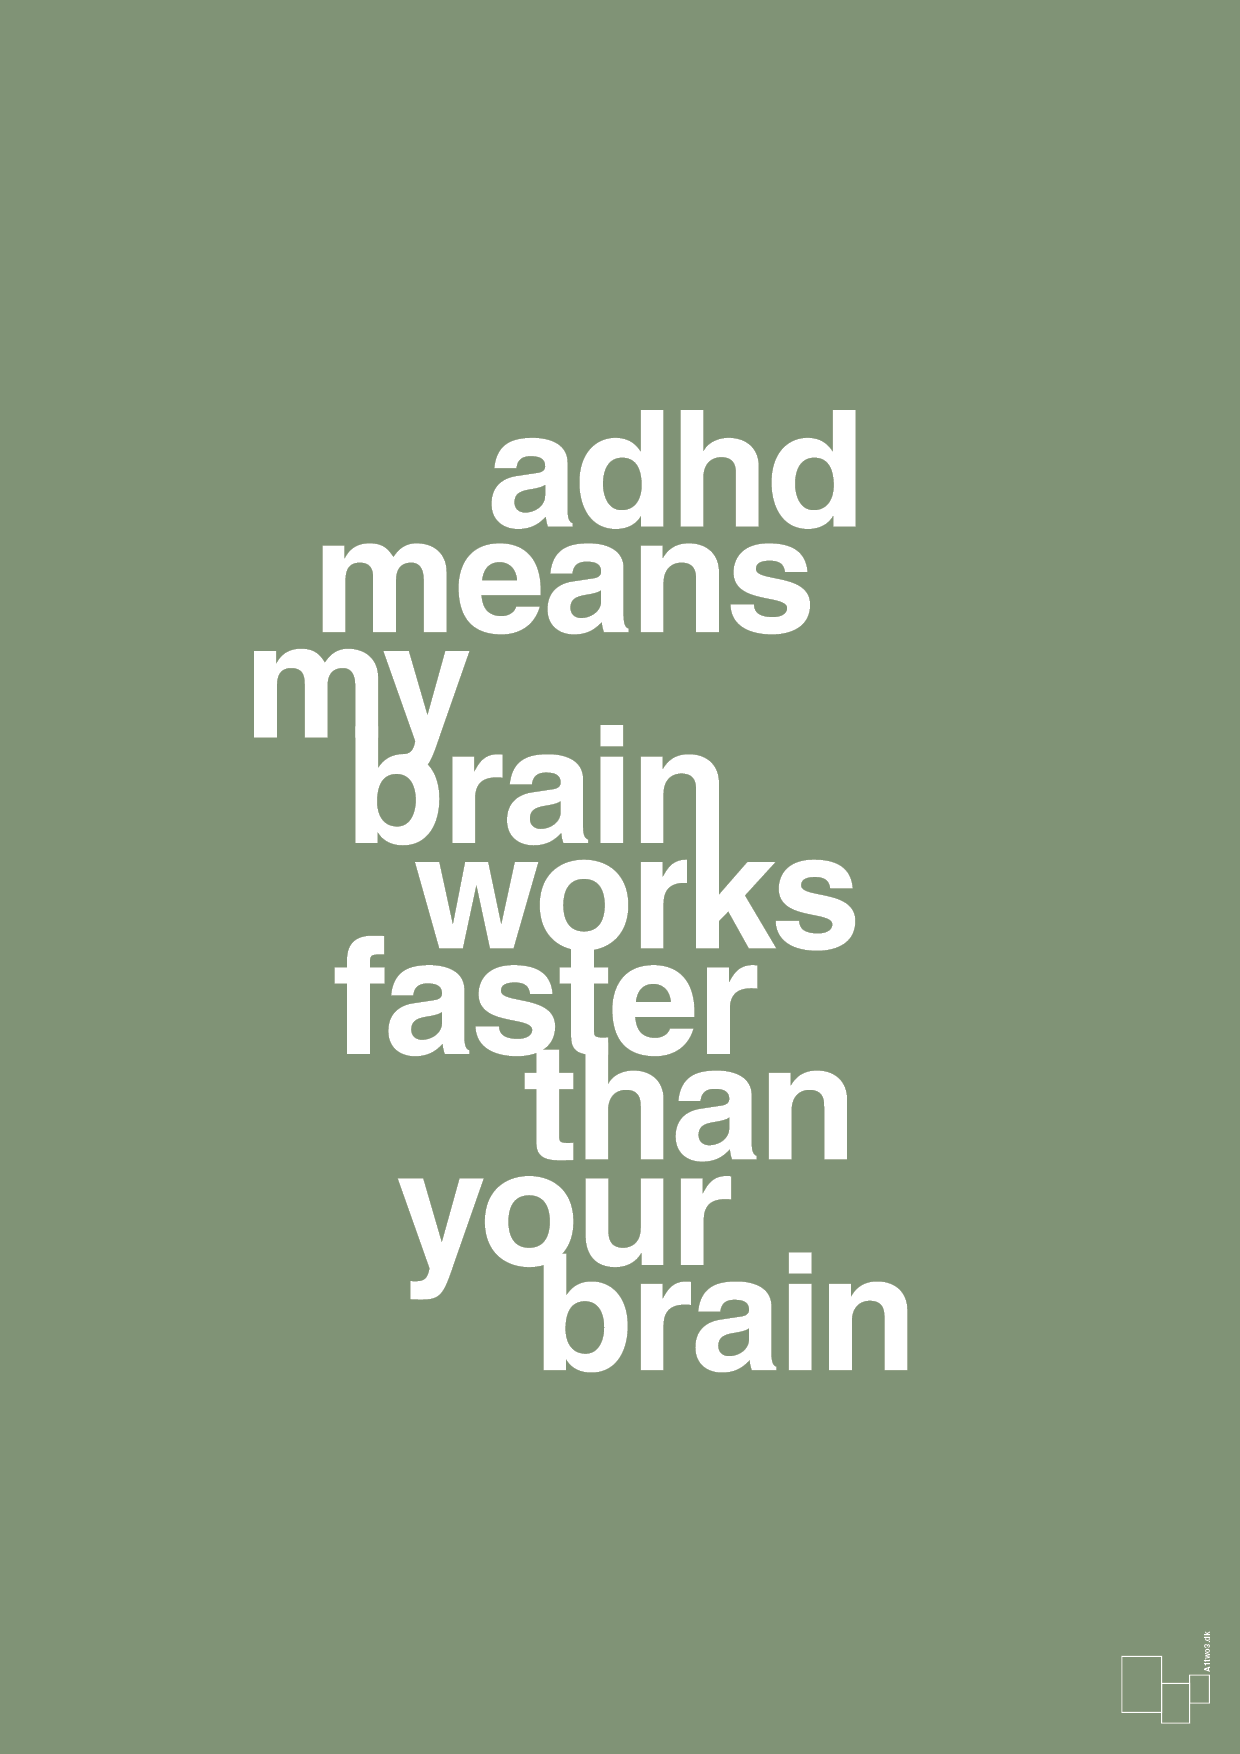 adhd means my brain works faster than your brain - Plakat med Samfund i Jade